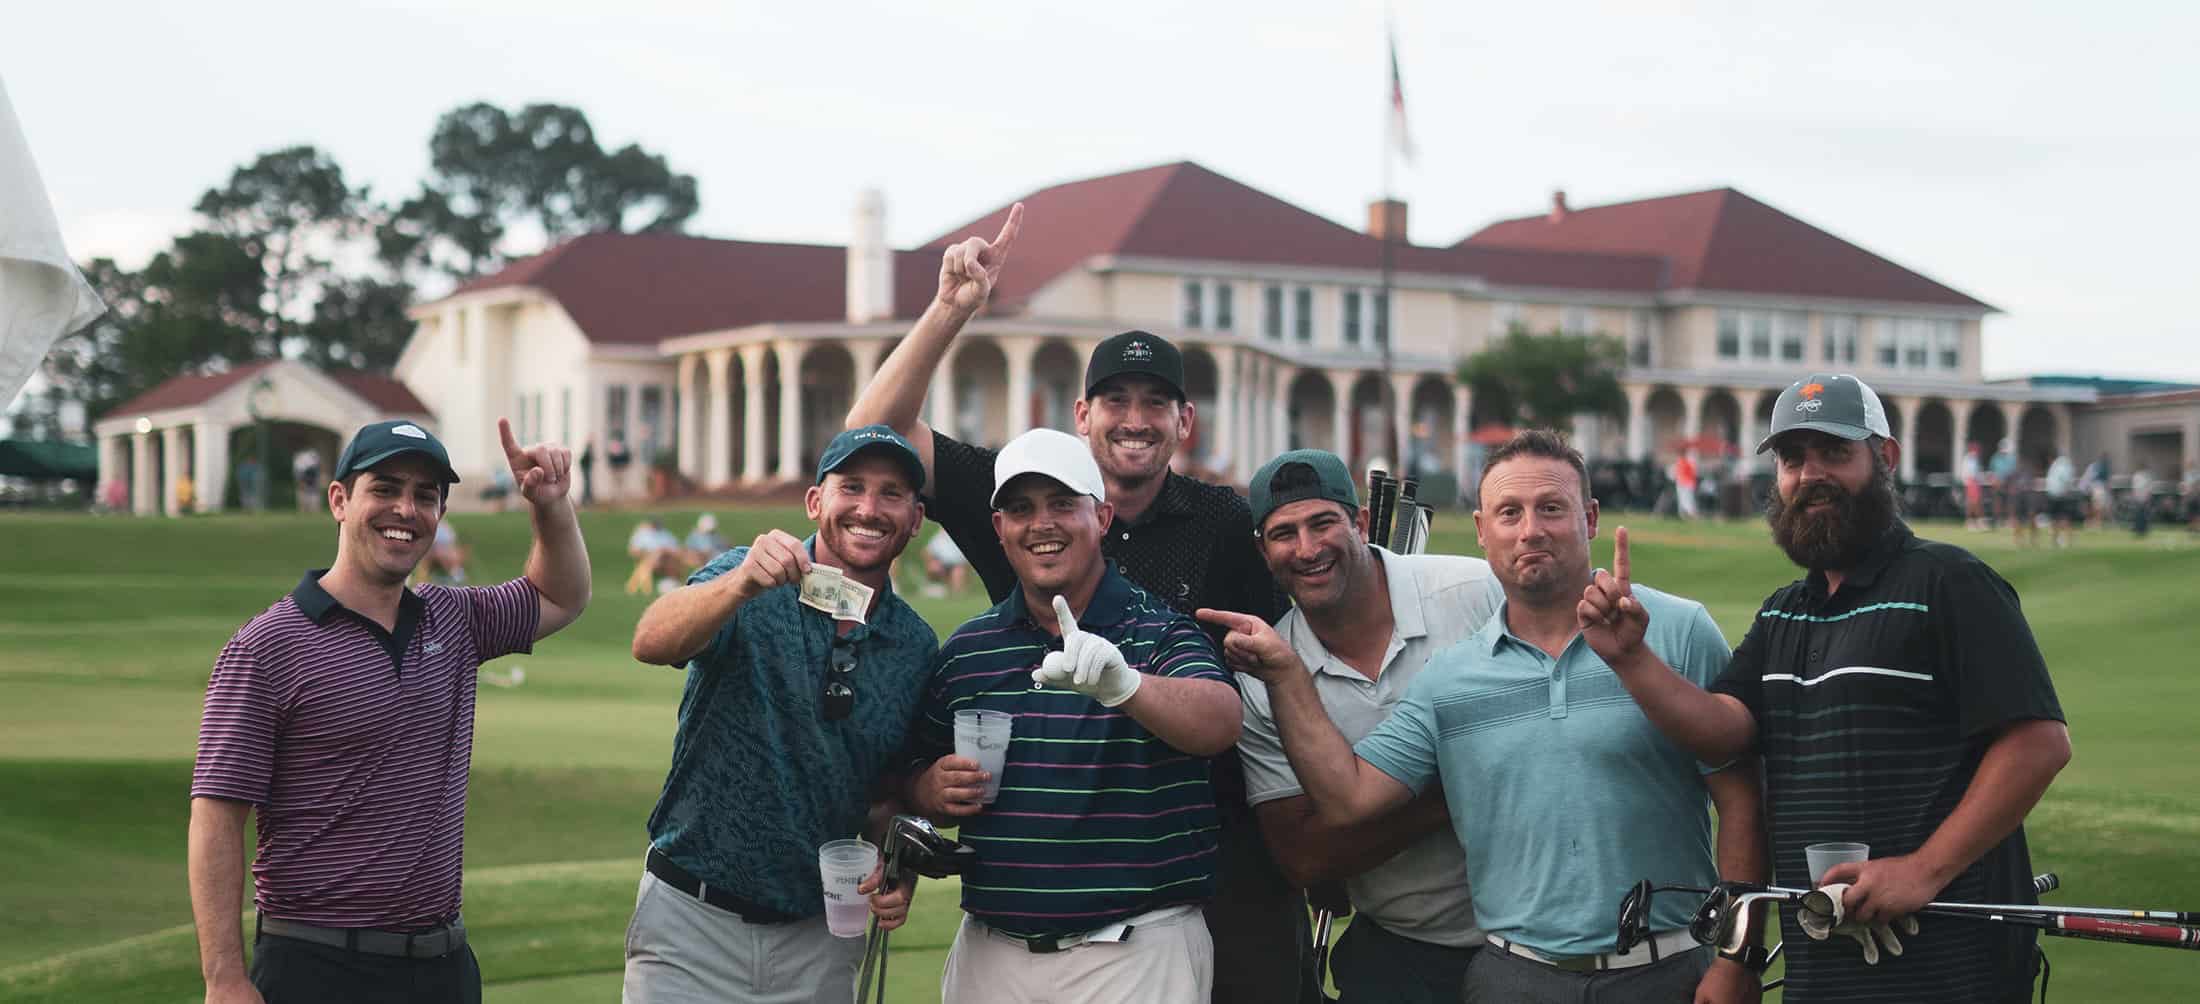 Play golf with your friends at Pinehurst Golf Resort with Pinehurst golf packages